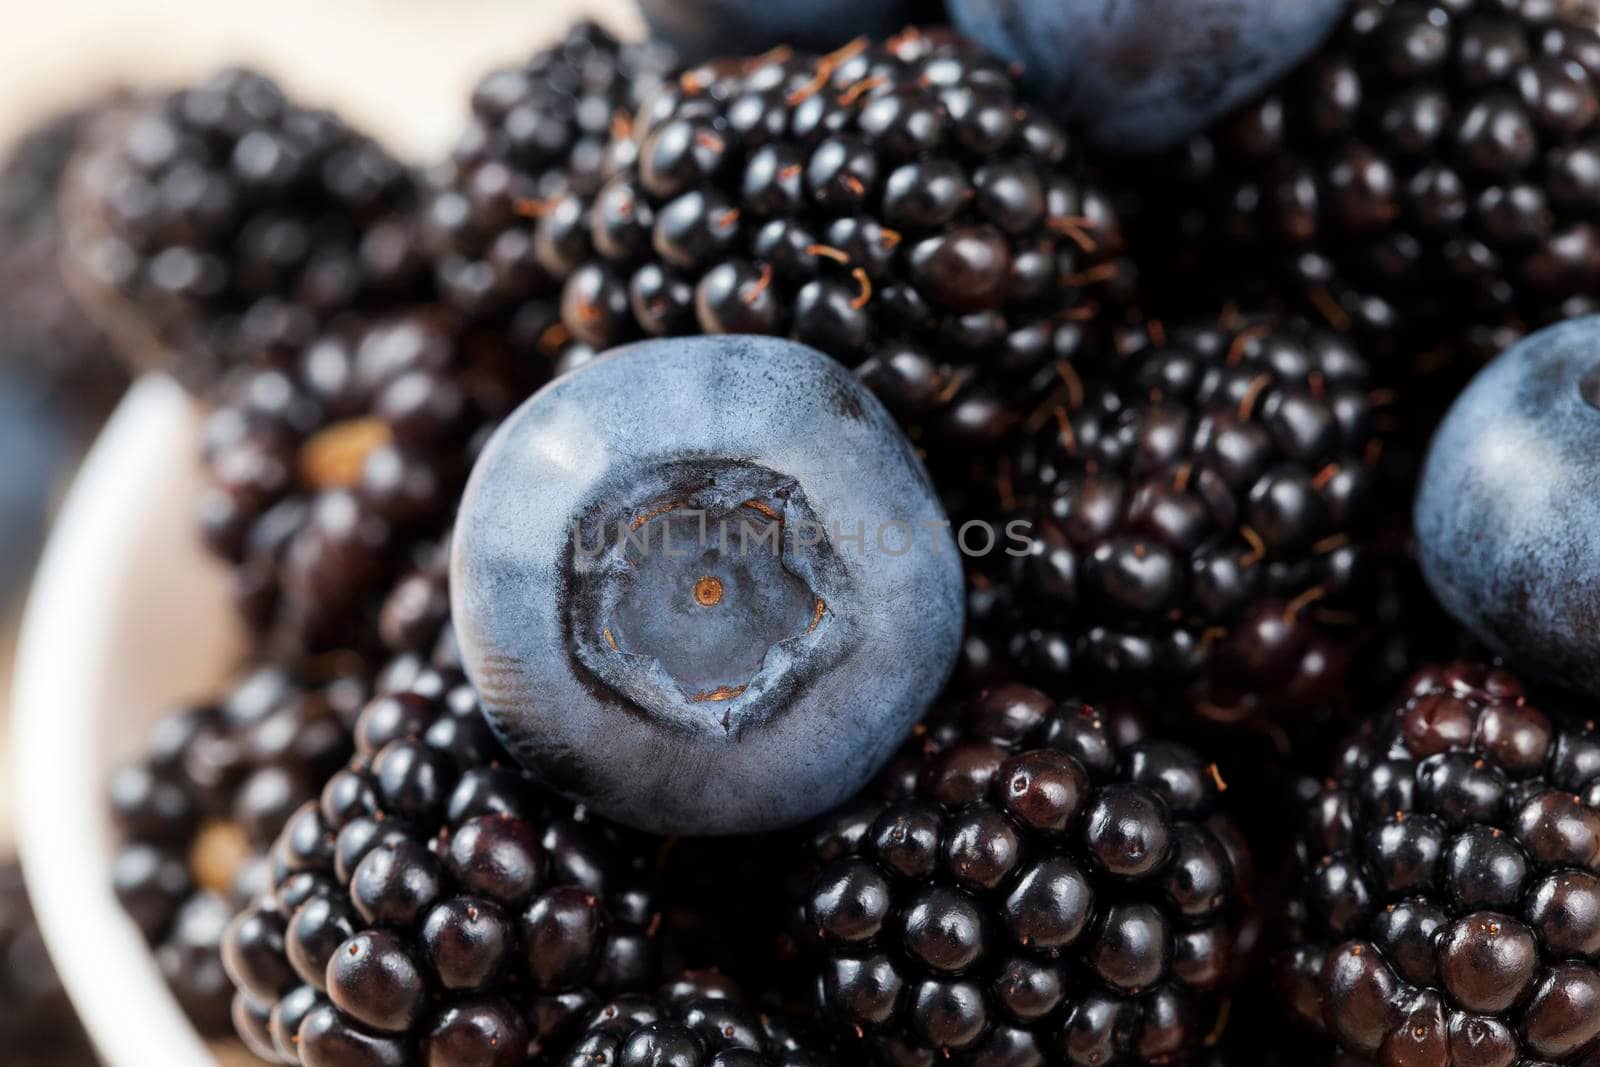 lying together in a plate of blueberries and blackberries during harvesting and eating, close-up photo